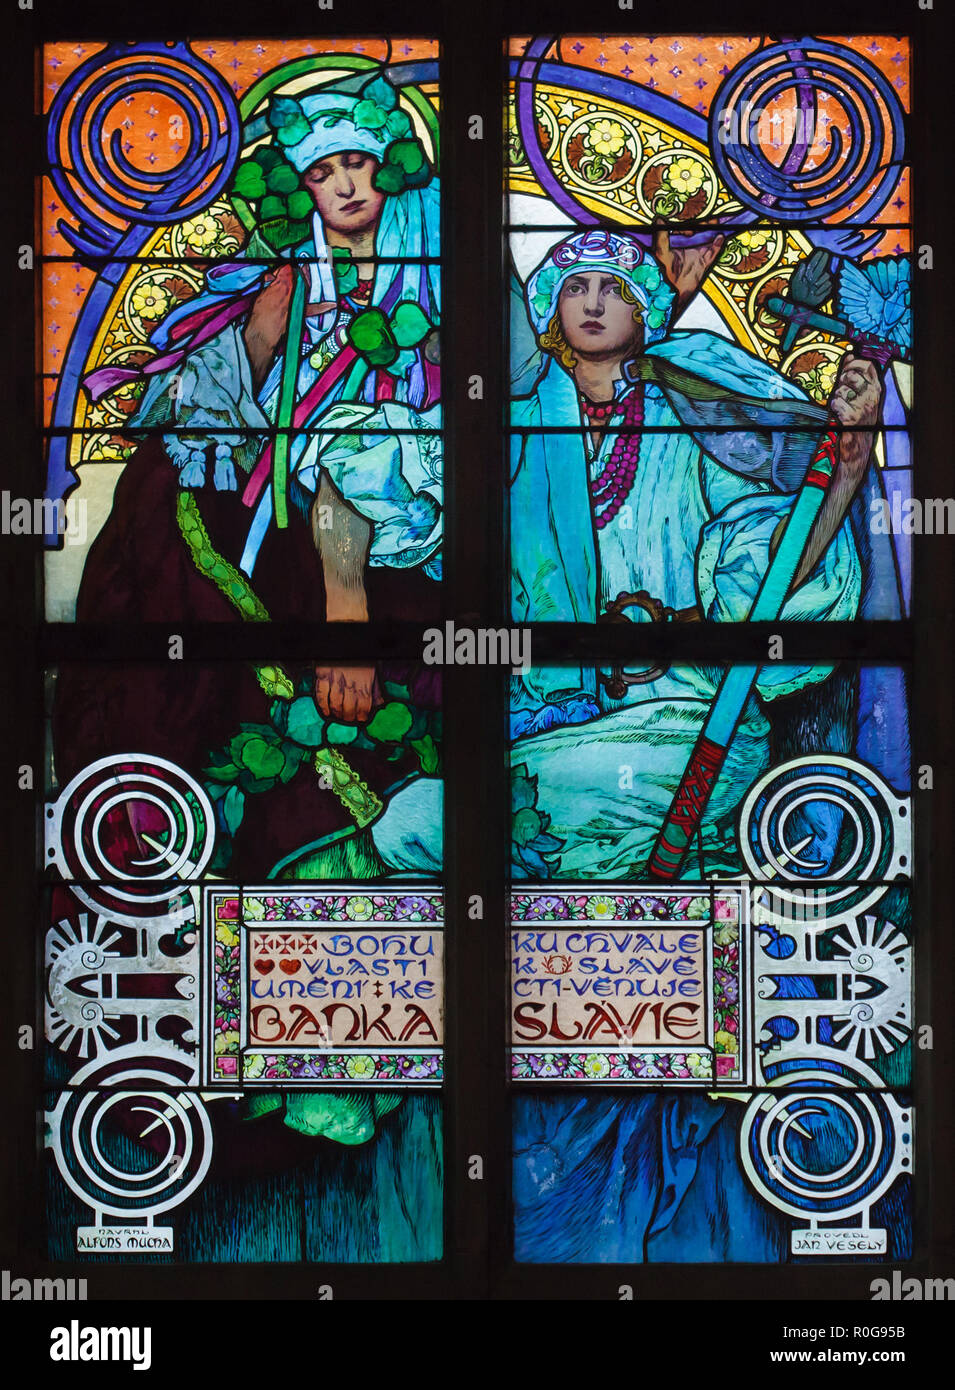 Detail of the stained-glass window designed by Czech Art Nouveau artist Alfons Mucha in Saint Vitus' Cathedral in the Prague Castle in Prague, Czech Republic. Stock Photo